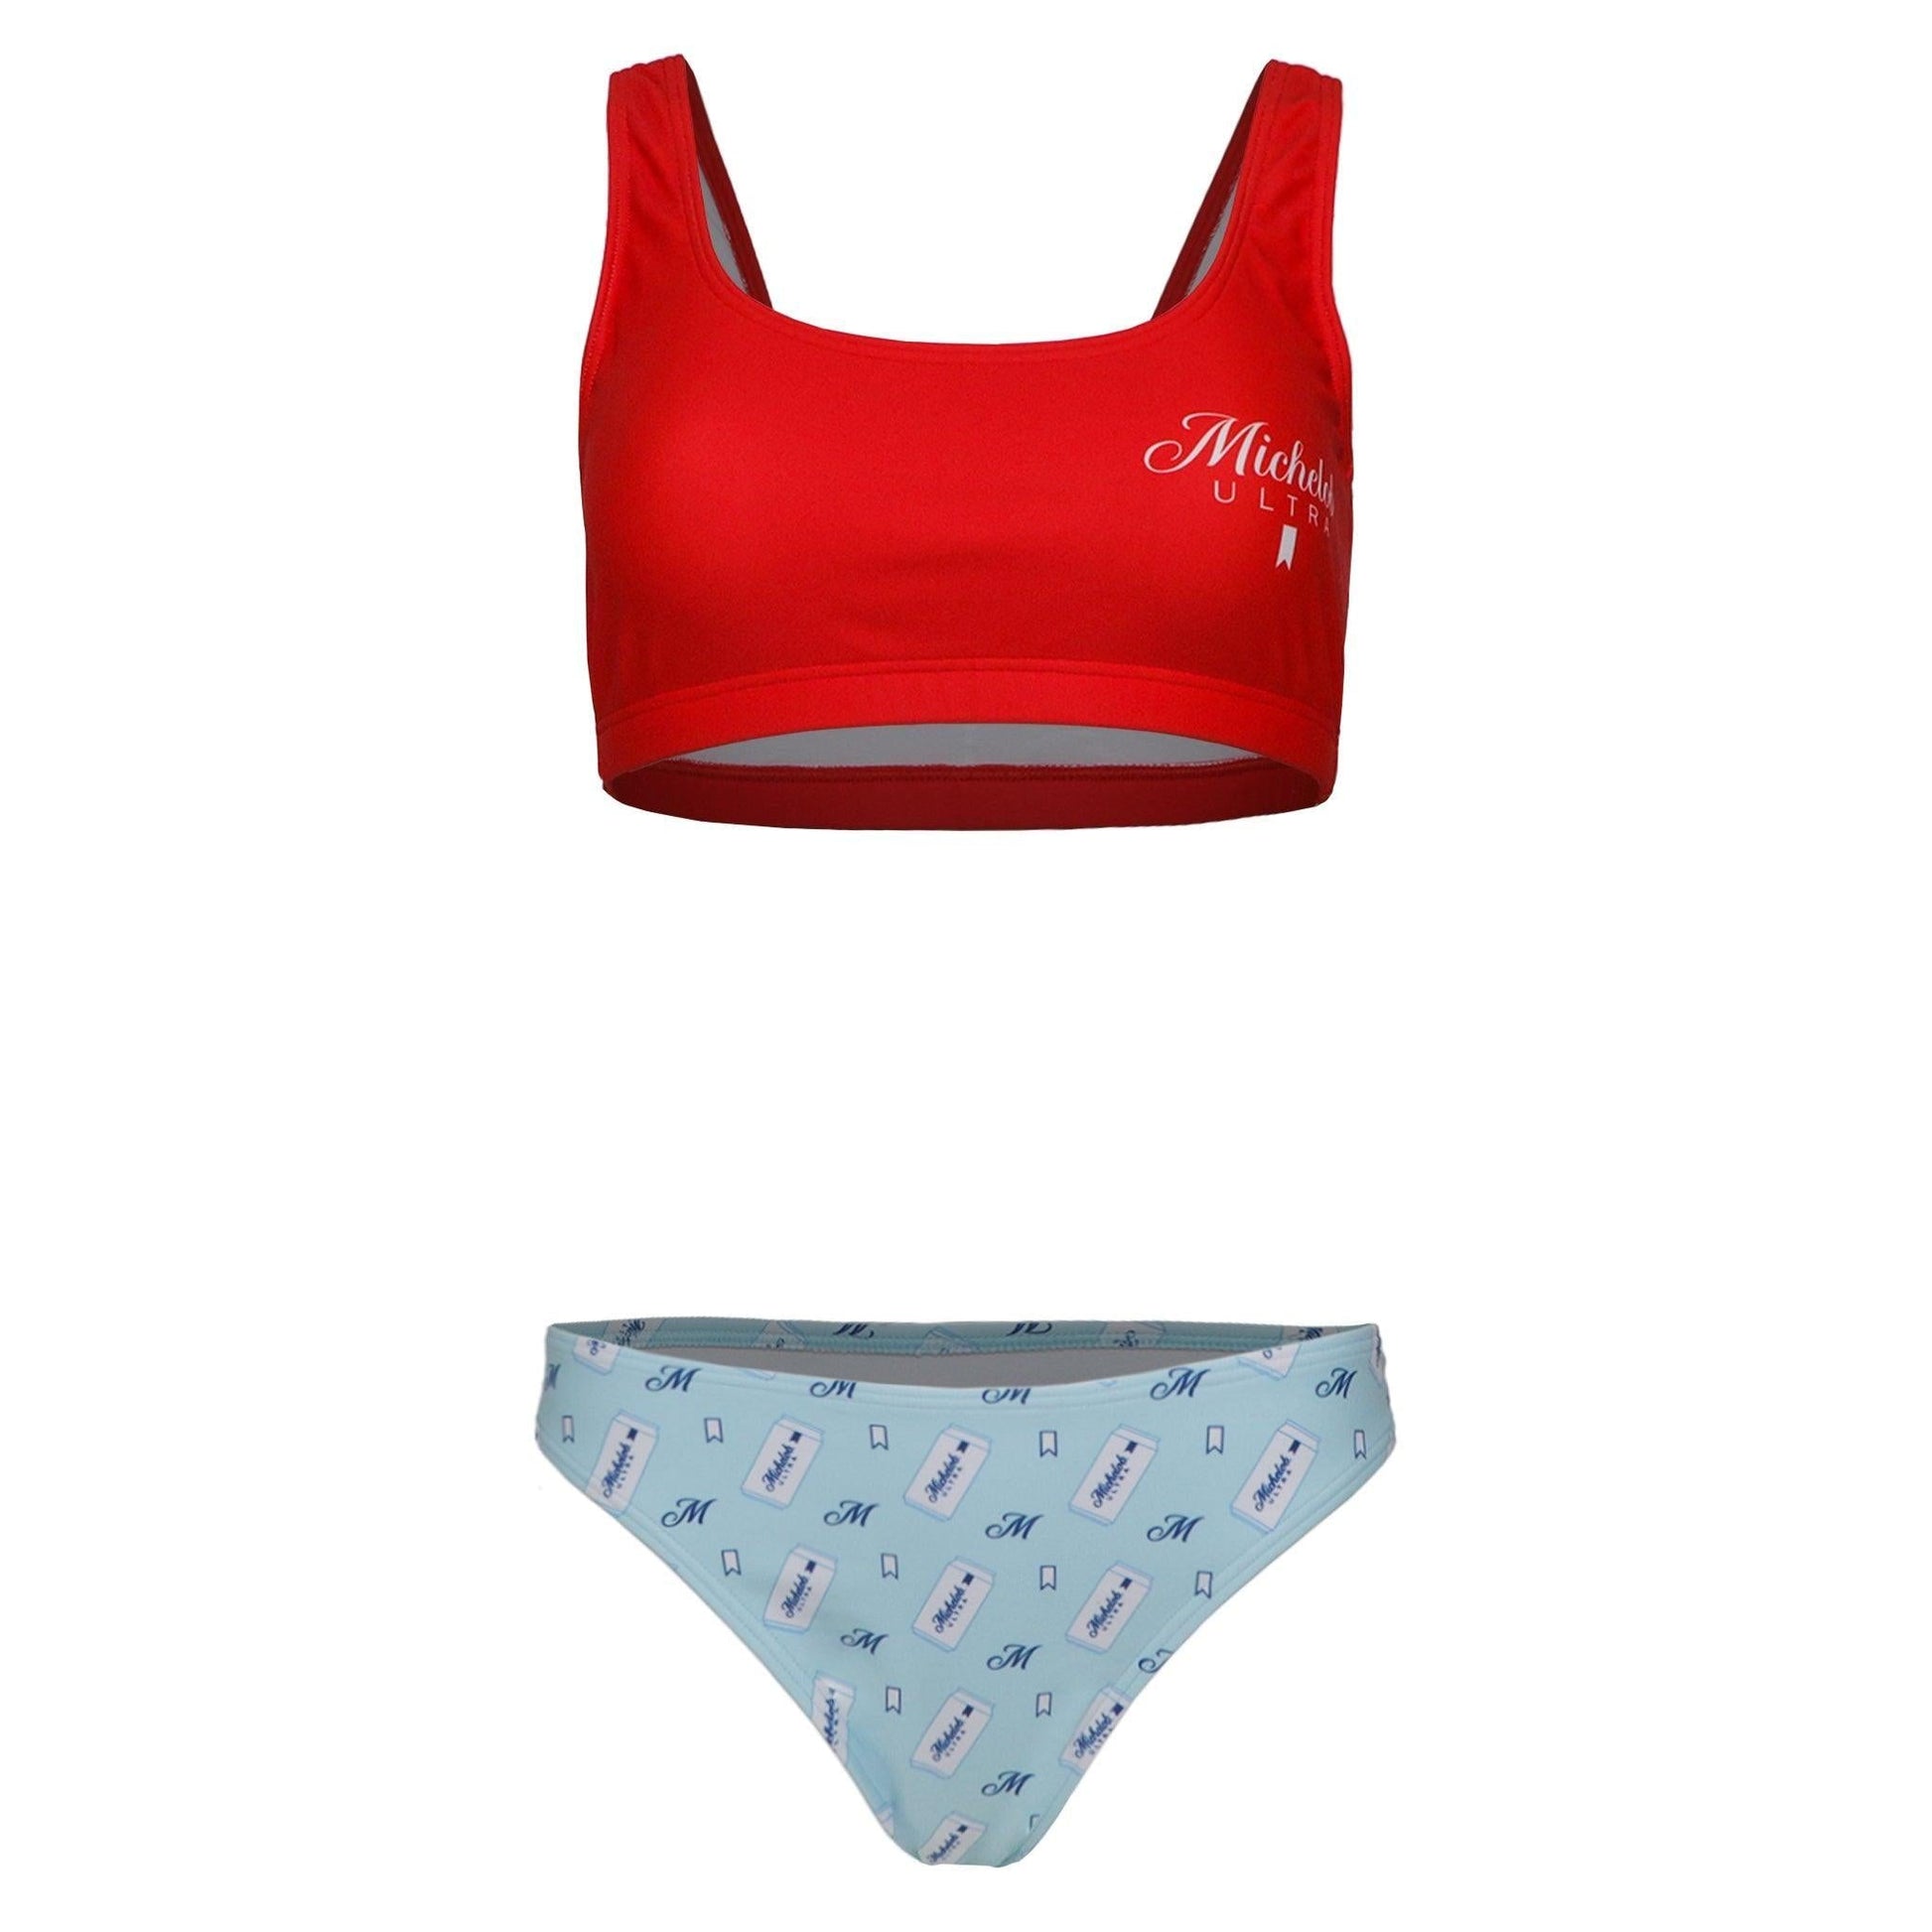 Michelob ULTRA two piece swimsuit set. Top is red with Michelob ULTRA logo on front left chest. Bottoms are light blue with an M, Ultra ribbon, and a can of Michelob ULTRA scattered 